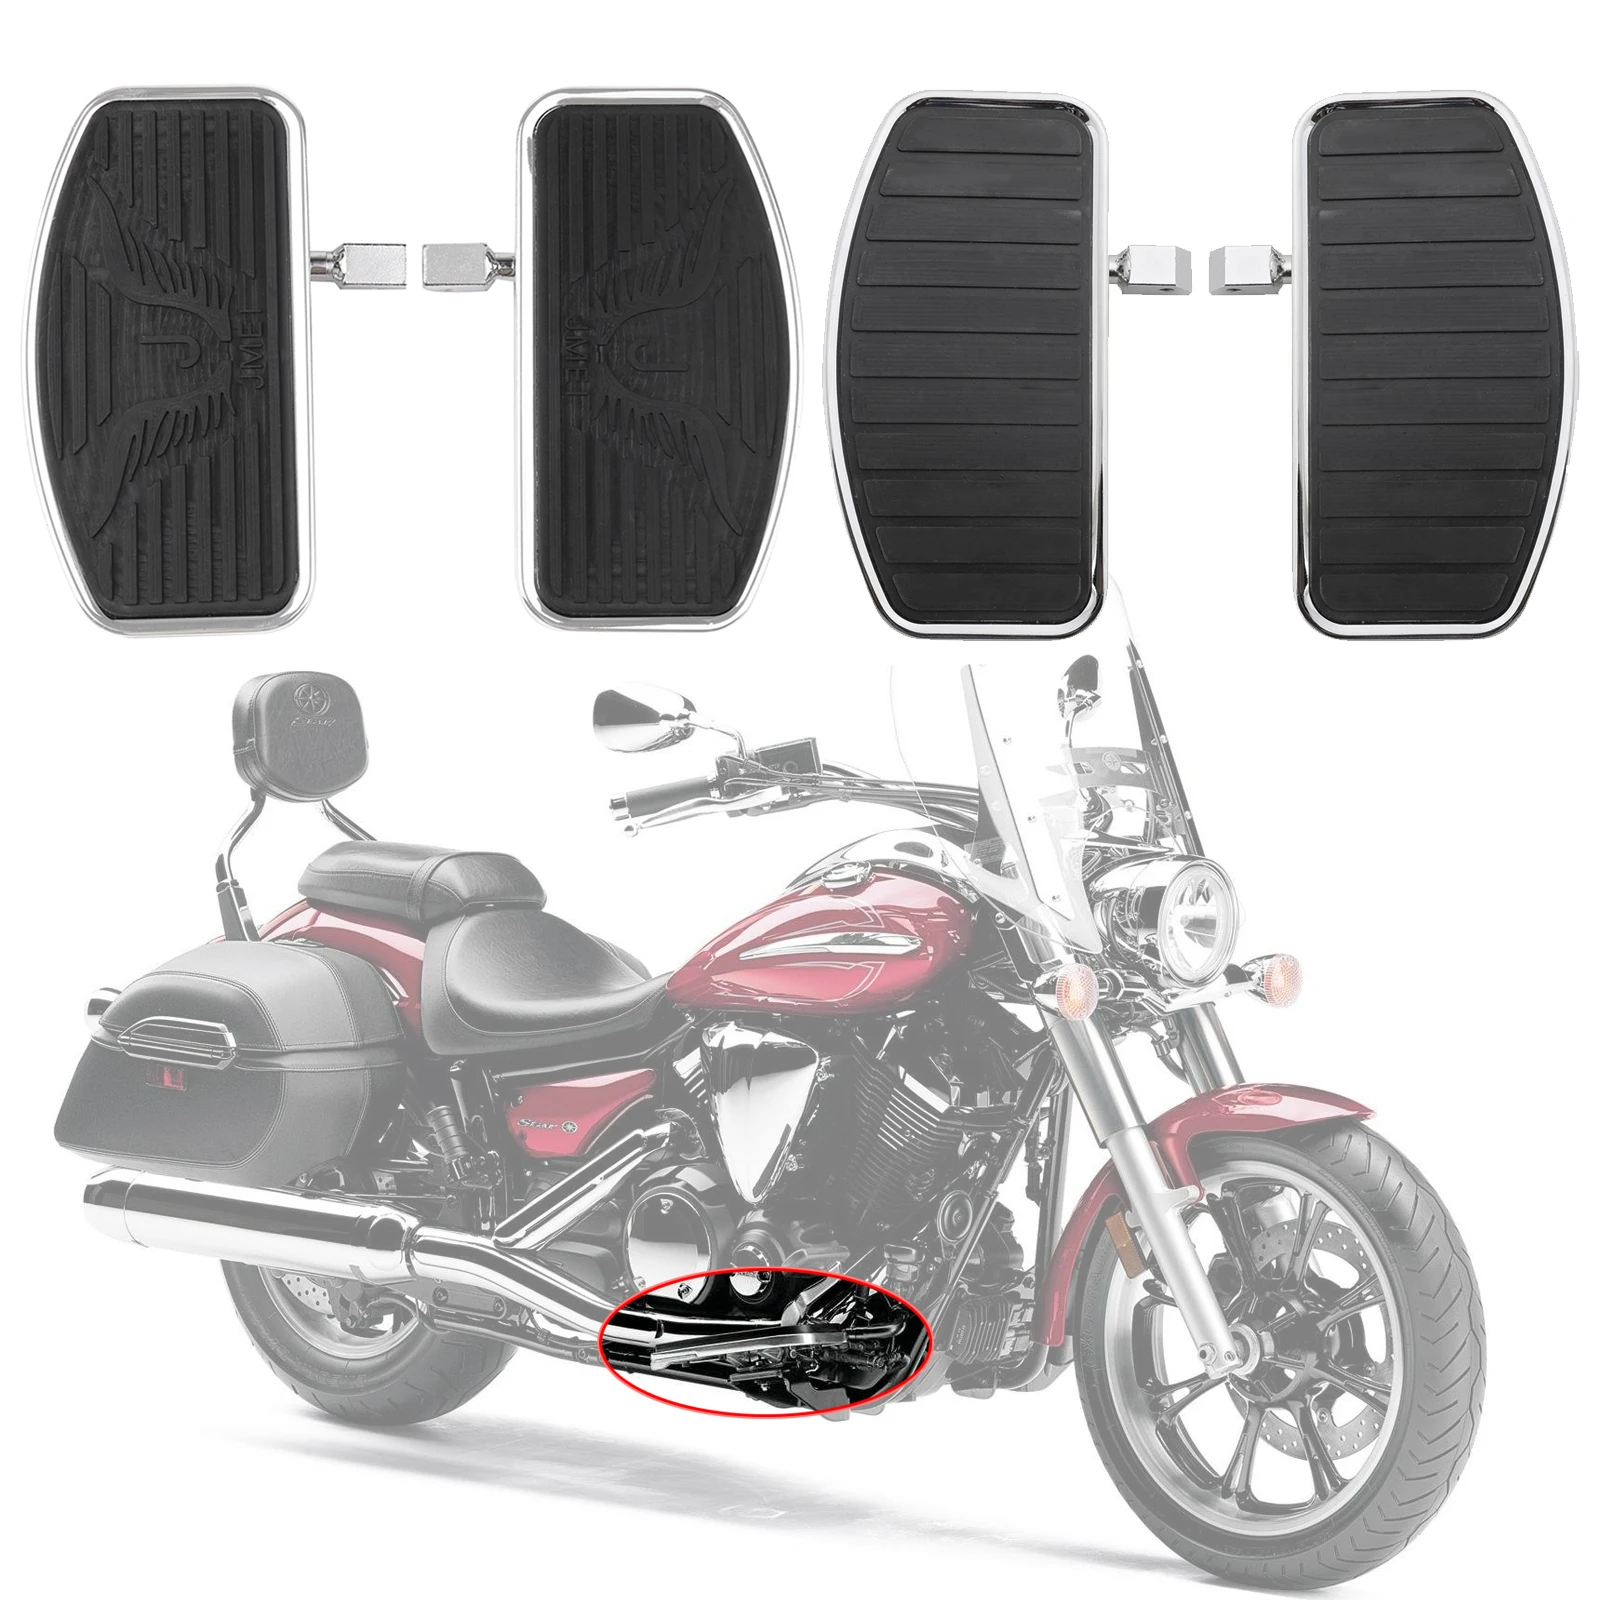 Footboard Full Footrests for Motorcycle Rider Passenger Foot Board Unive... - $63.87+